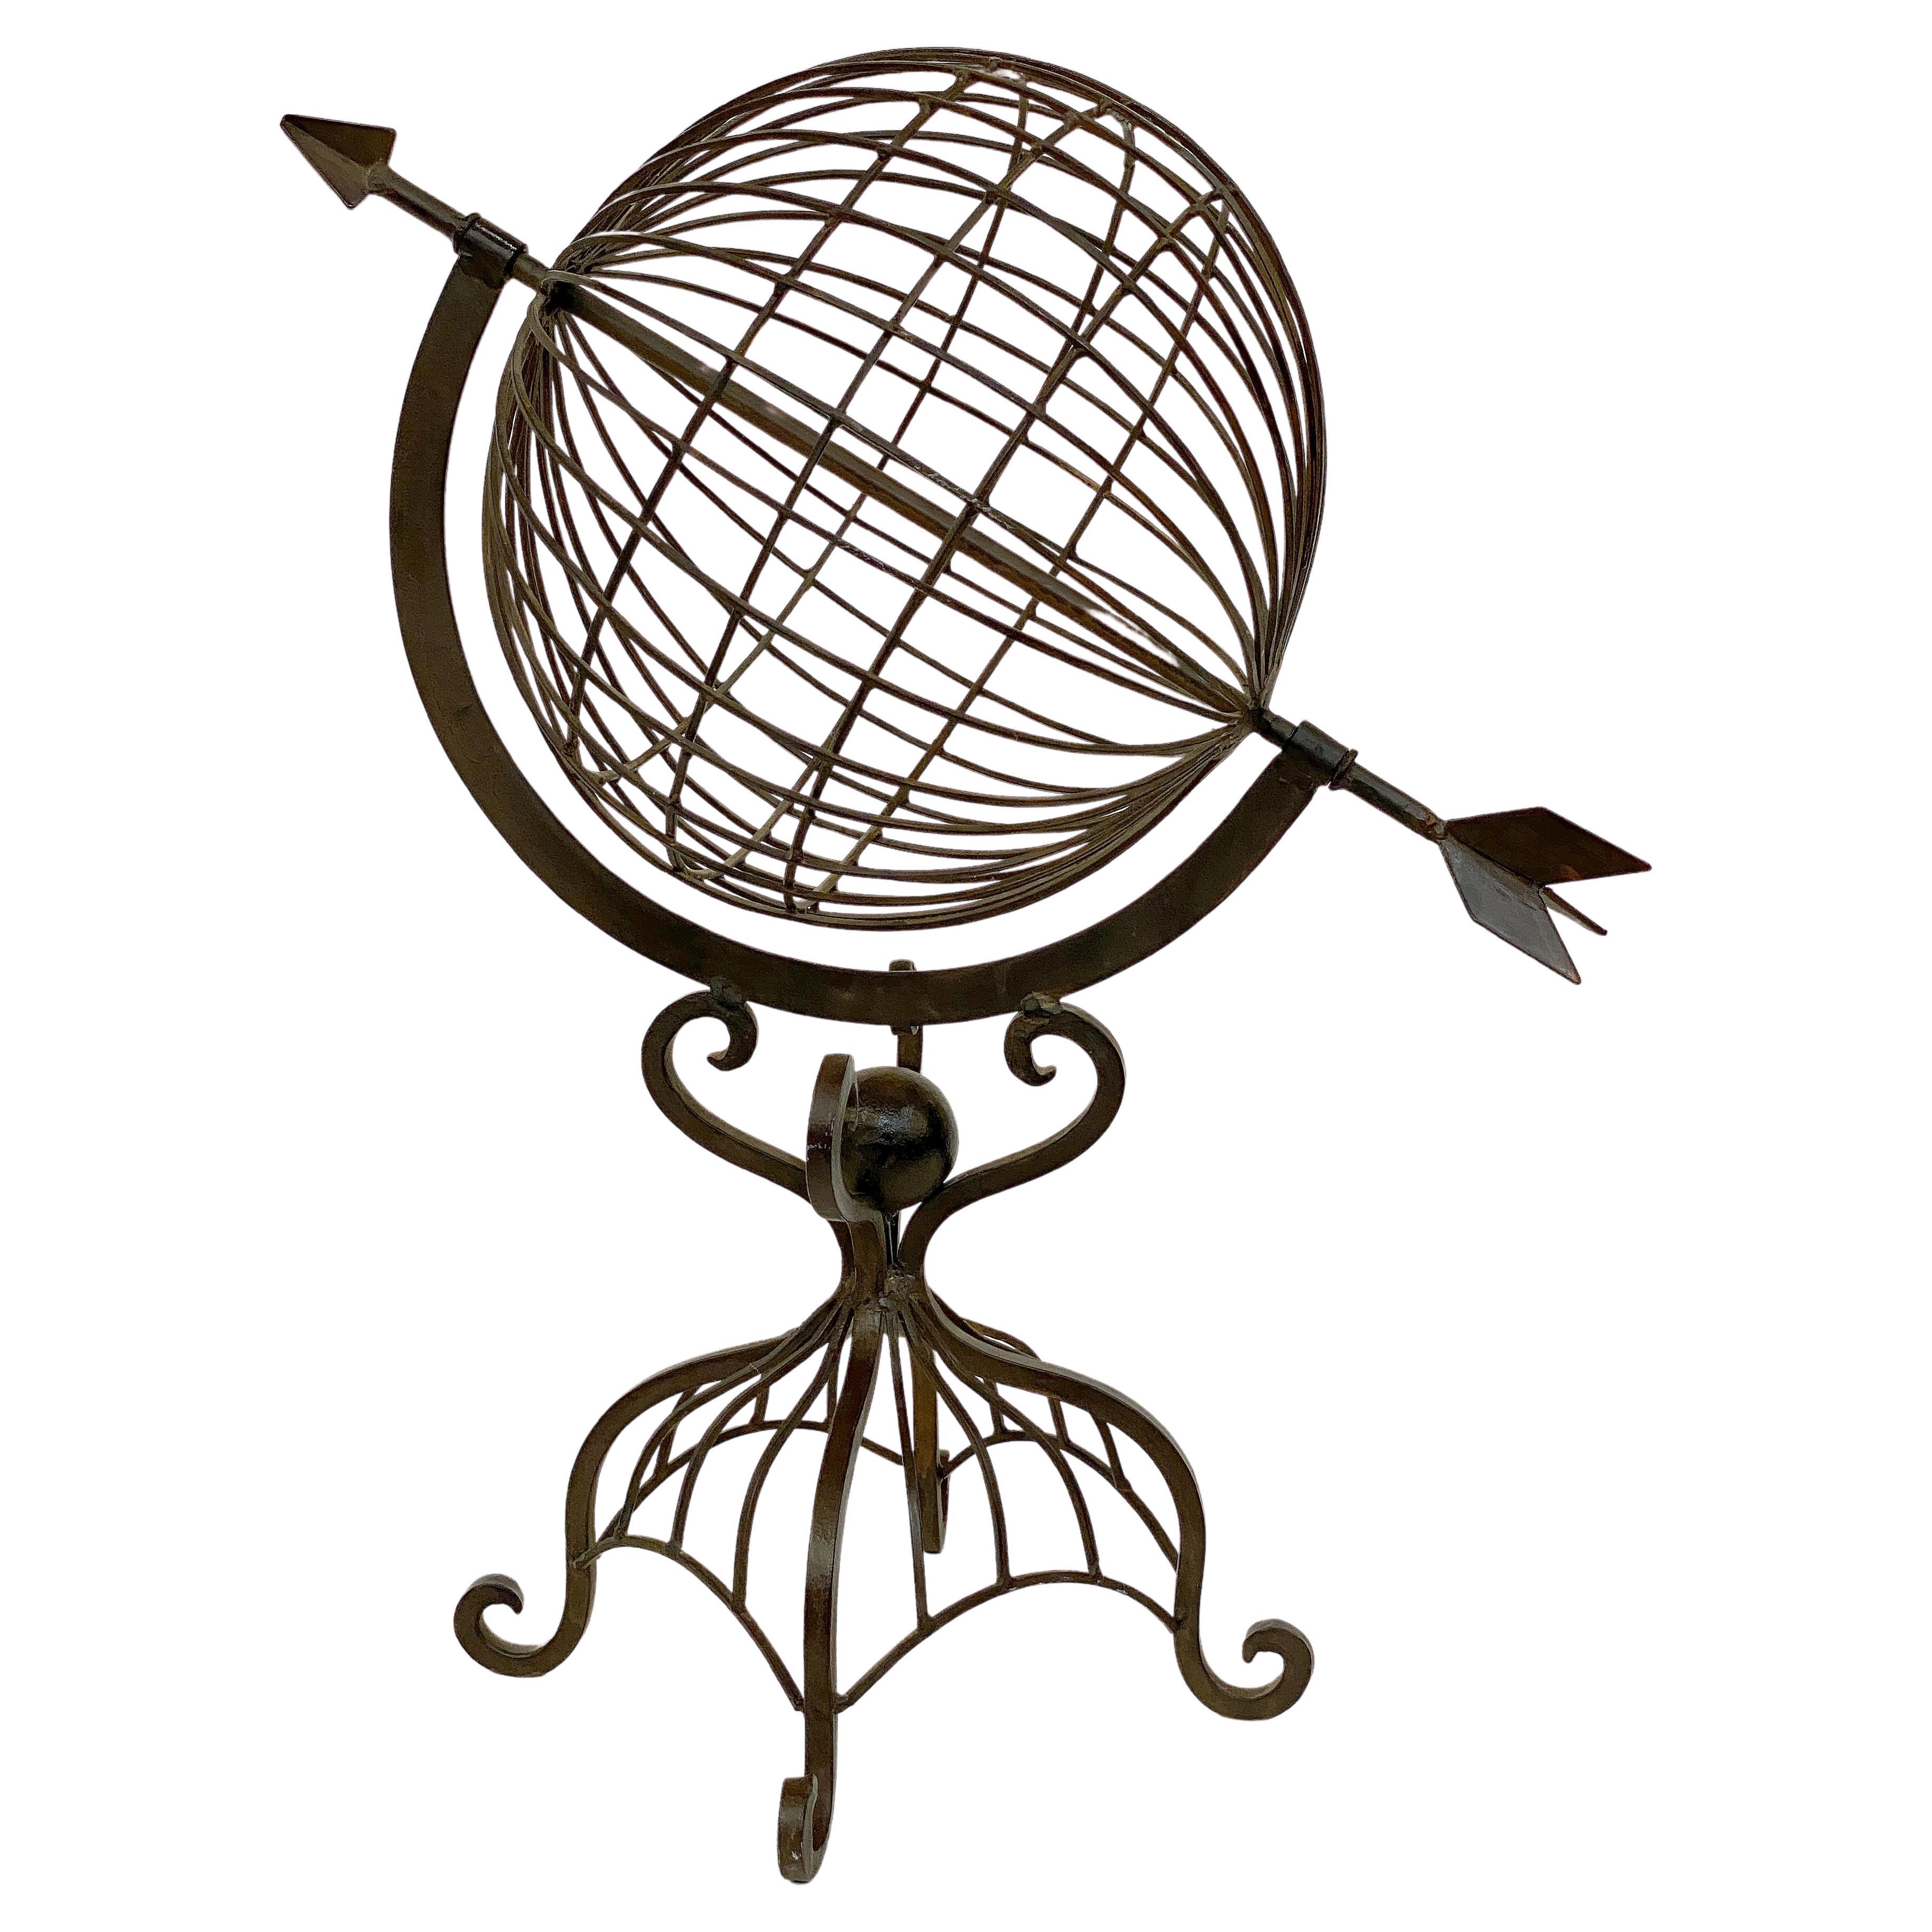 French Armillary Sphere on Stand or Garden Ornament of Wrought Iron